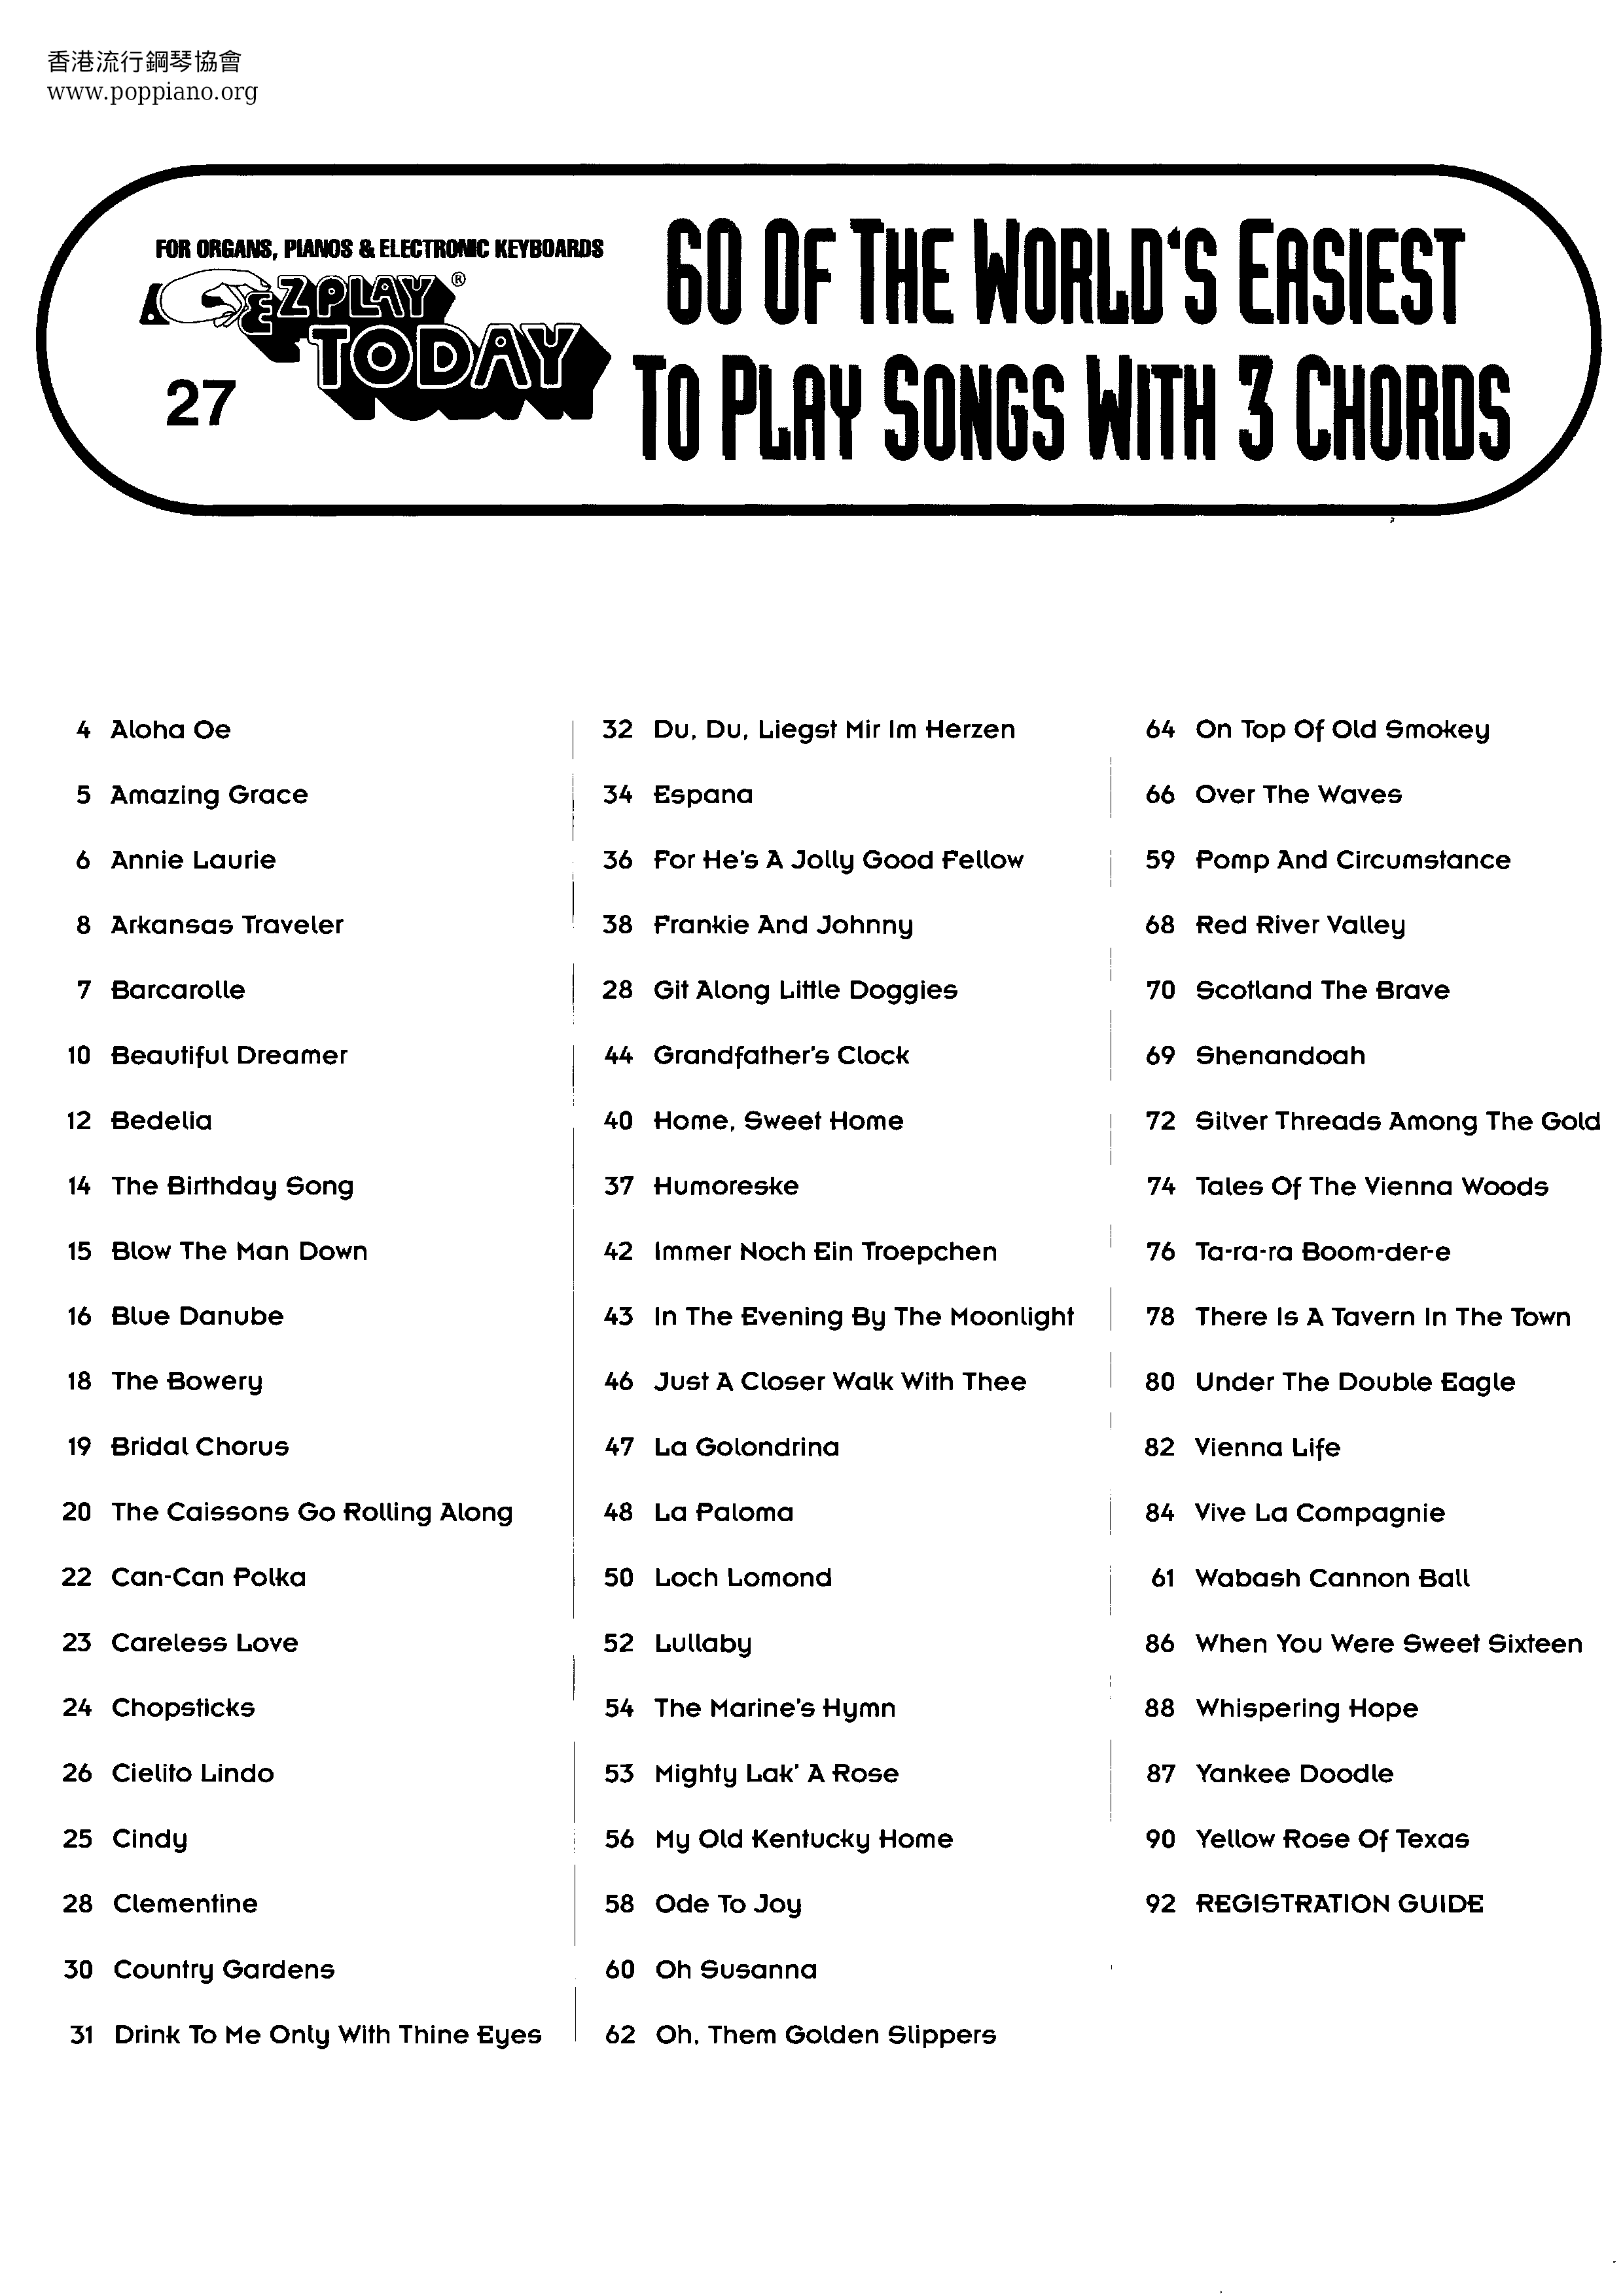 Easiest To Play Songs With 3 Chords 92 pages琴谱